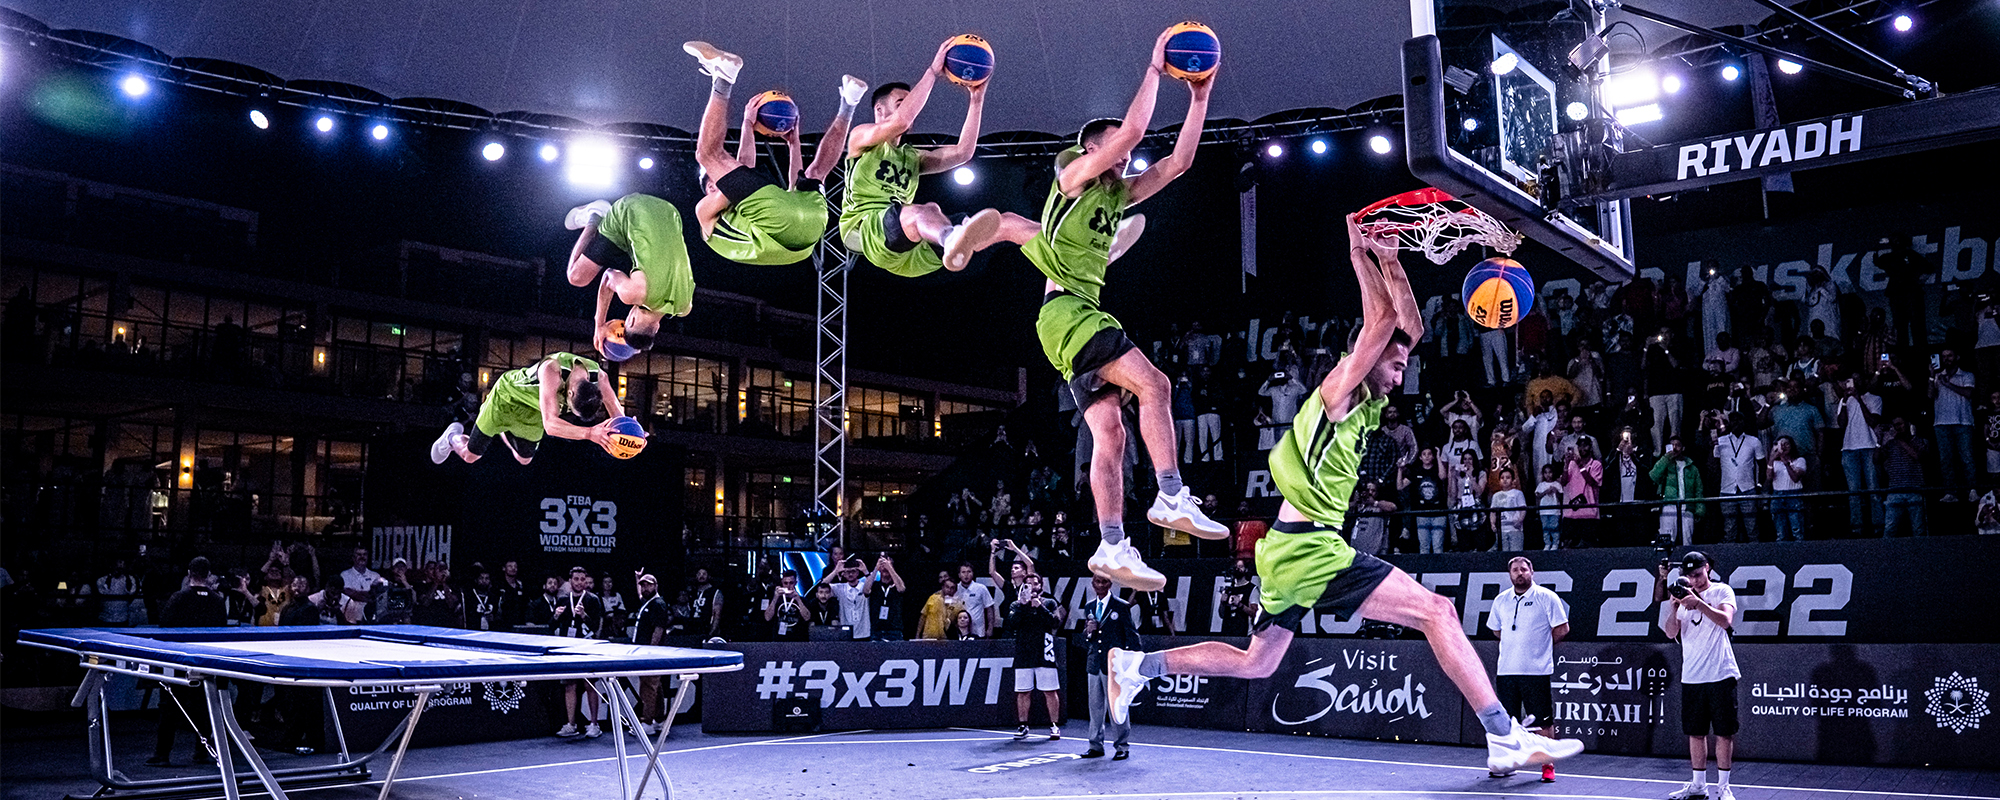 Two Guiness World Records at the FIBA 3x3 WT 2022 in Riyadh